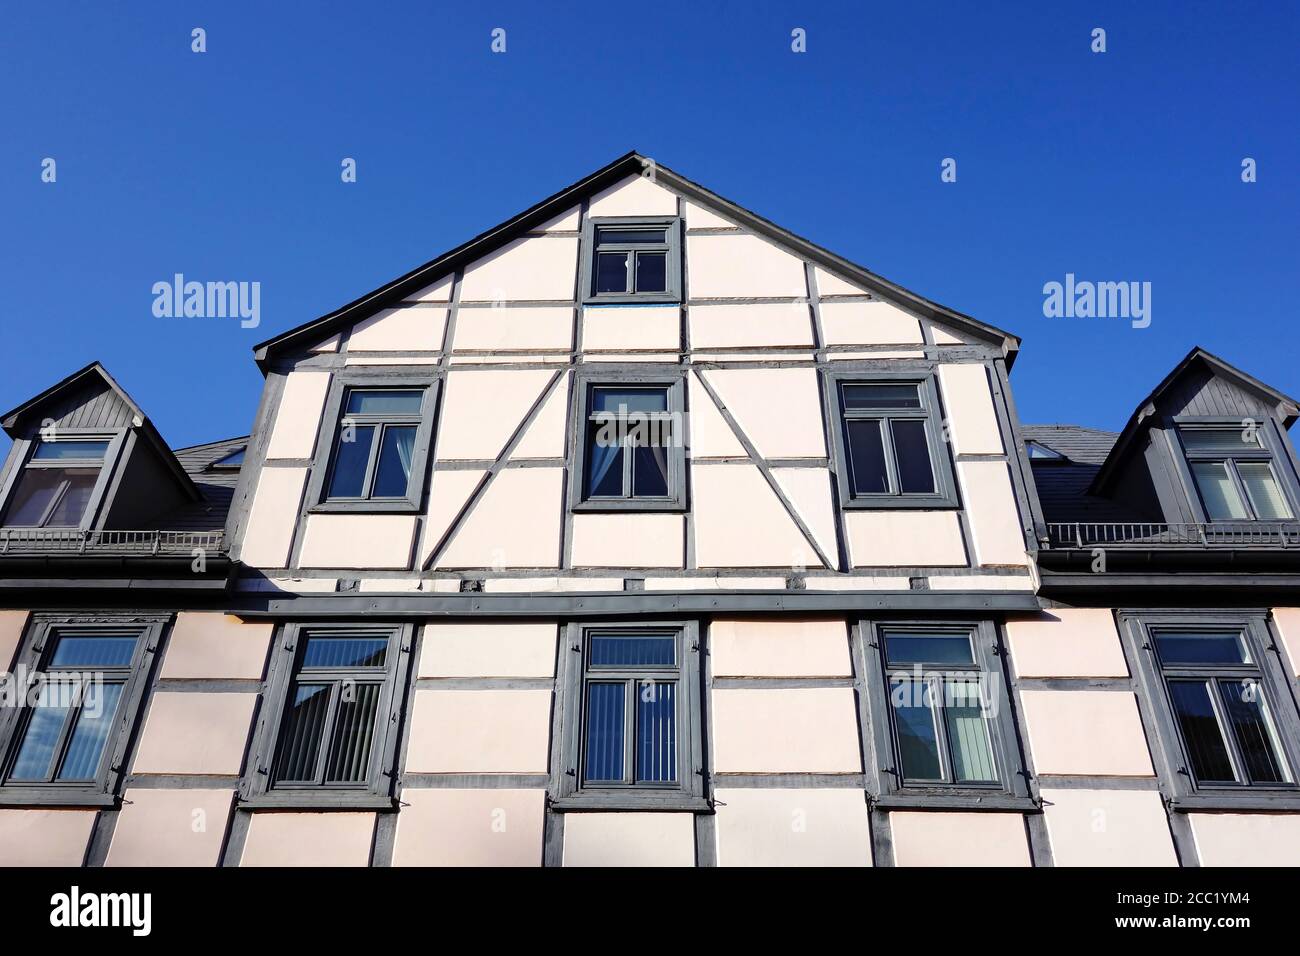 Germany, Bückeburg, View of historical building Stock Photo